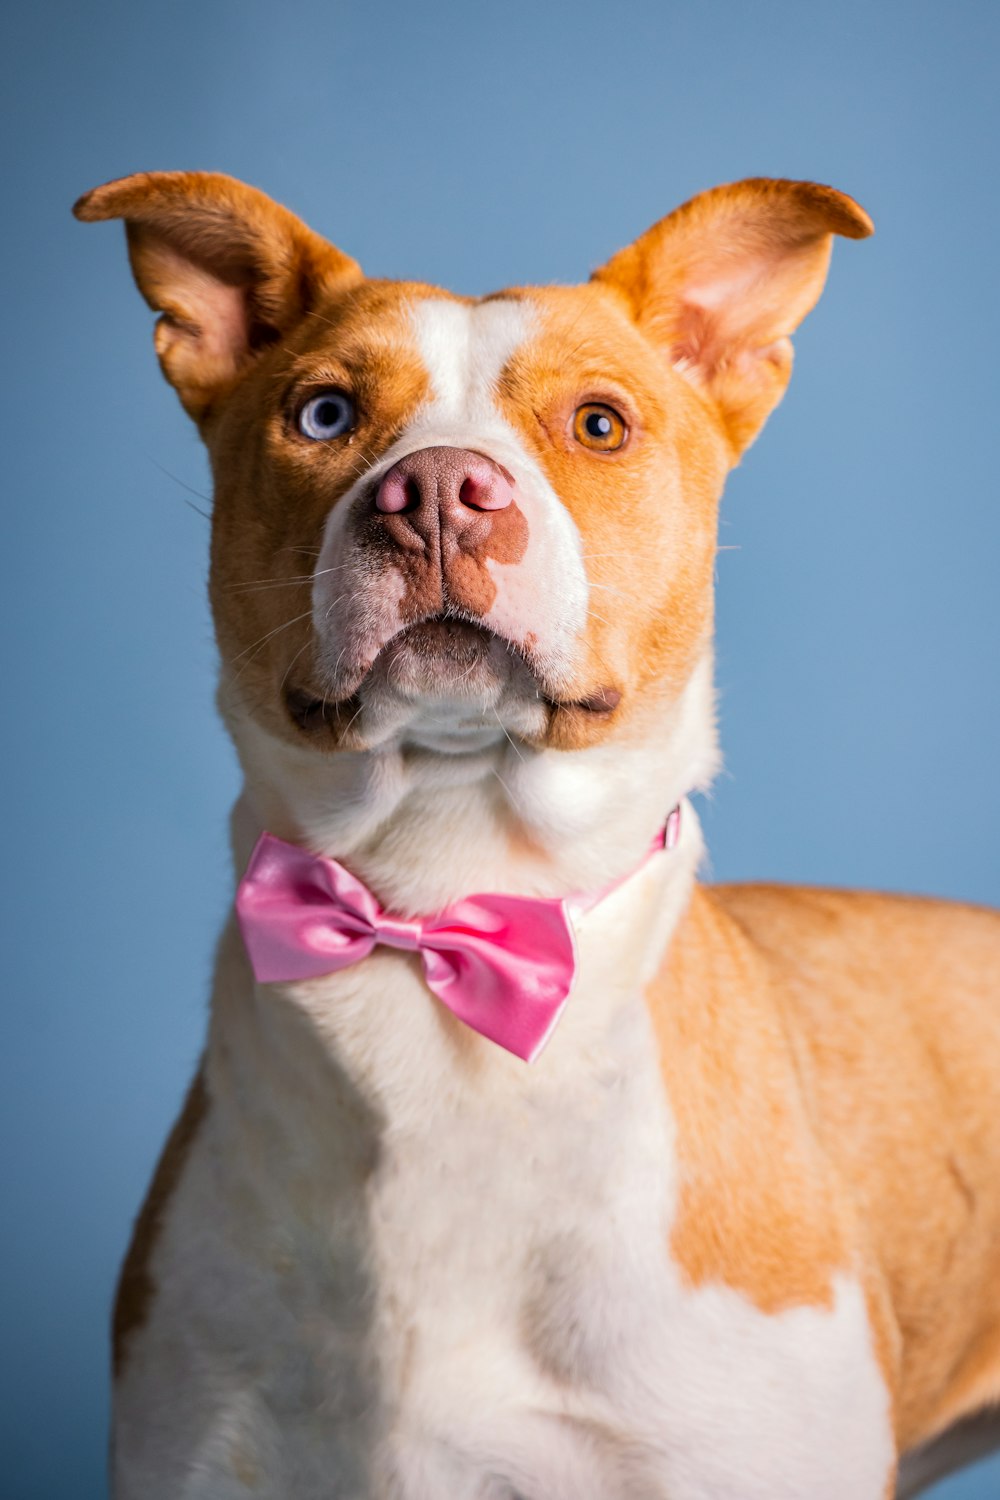 a brown and white dog wearing a pink bow tie